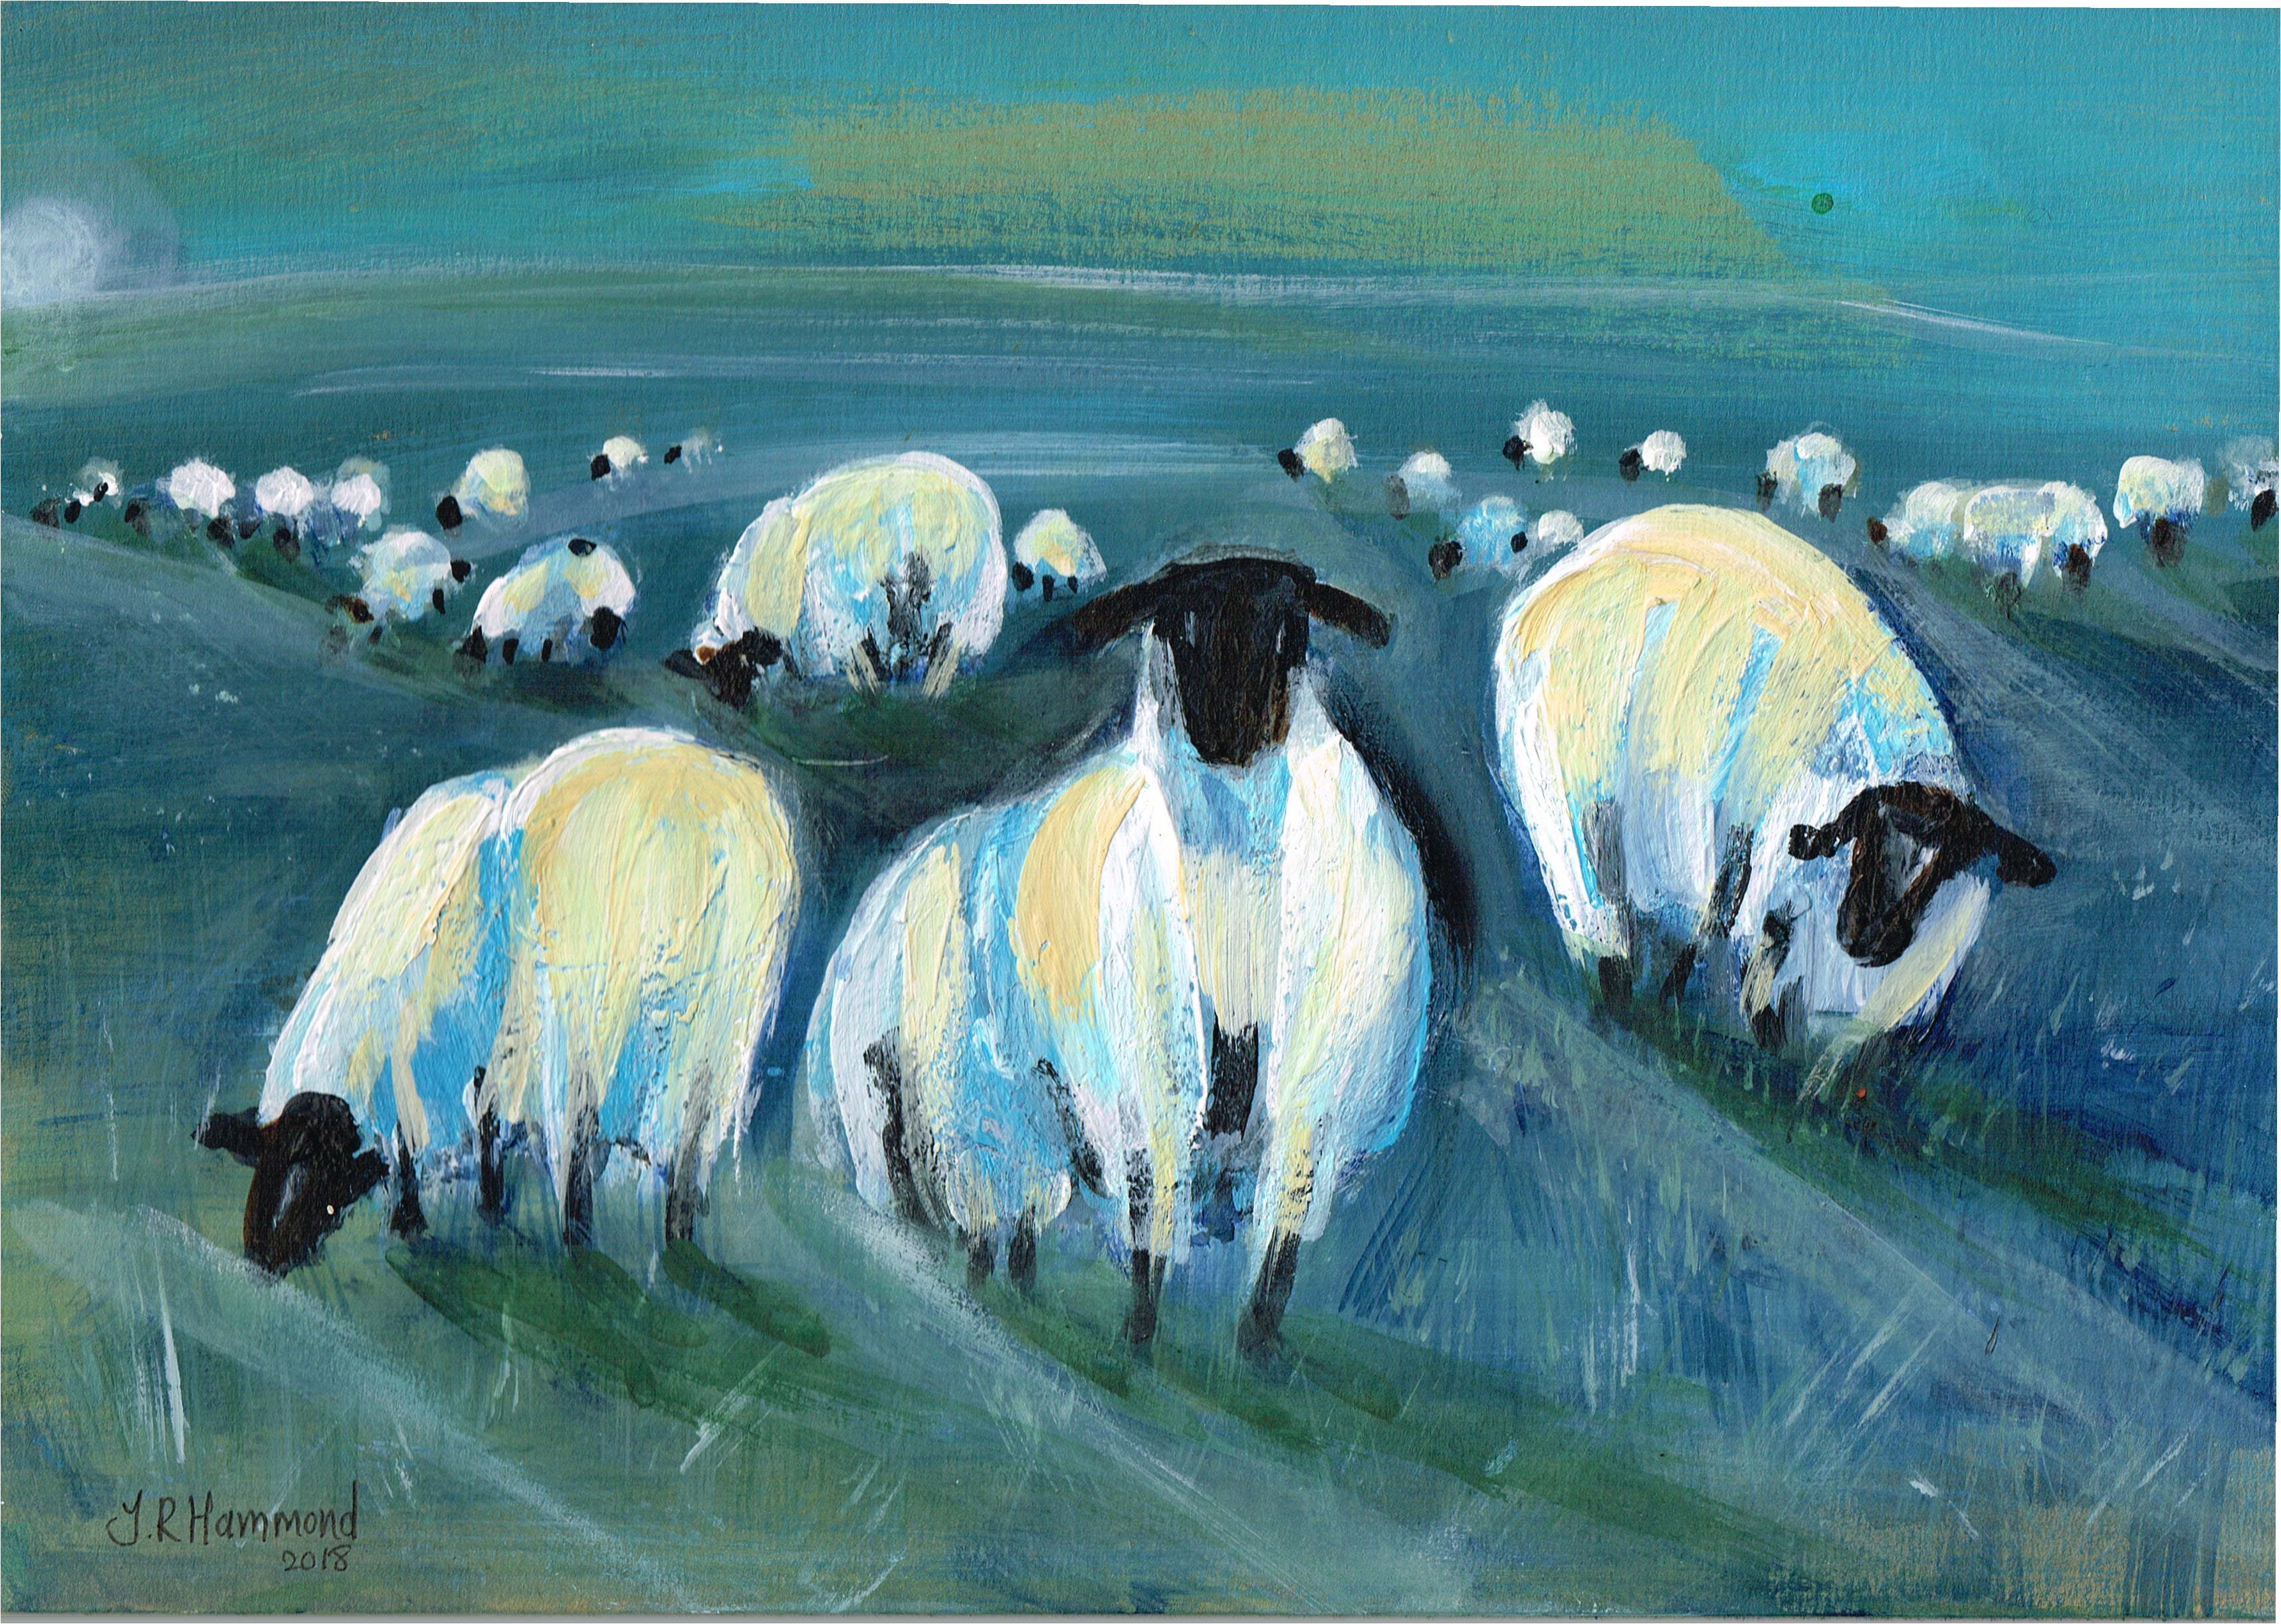 At Night I Dream of Acrylic Sheep Painting - Four (sold)  Smart Deco Homeware Lighting and Art by Jacqueline hammond